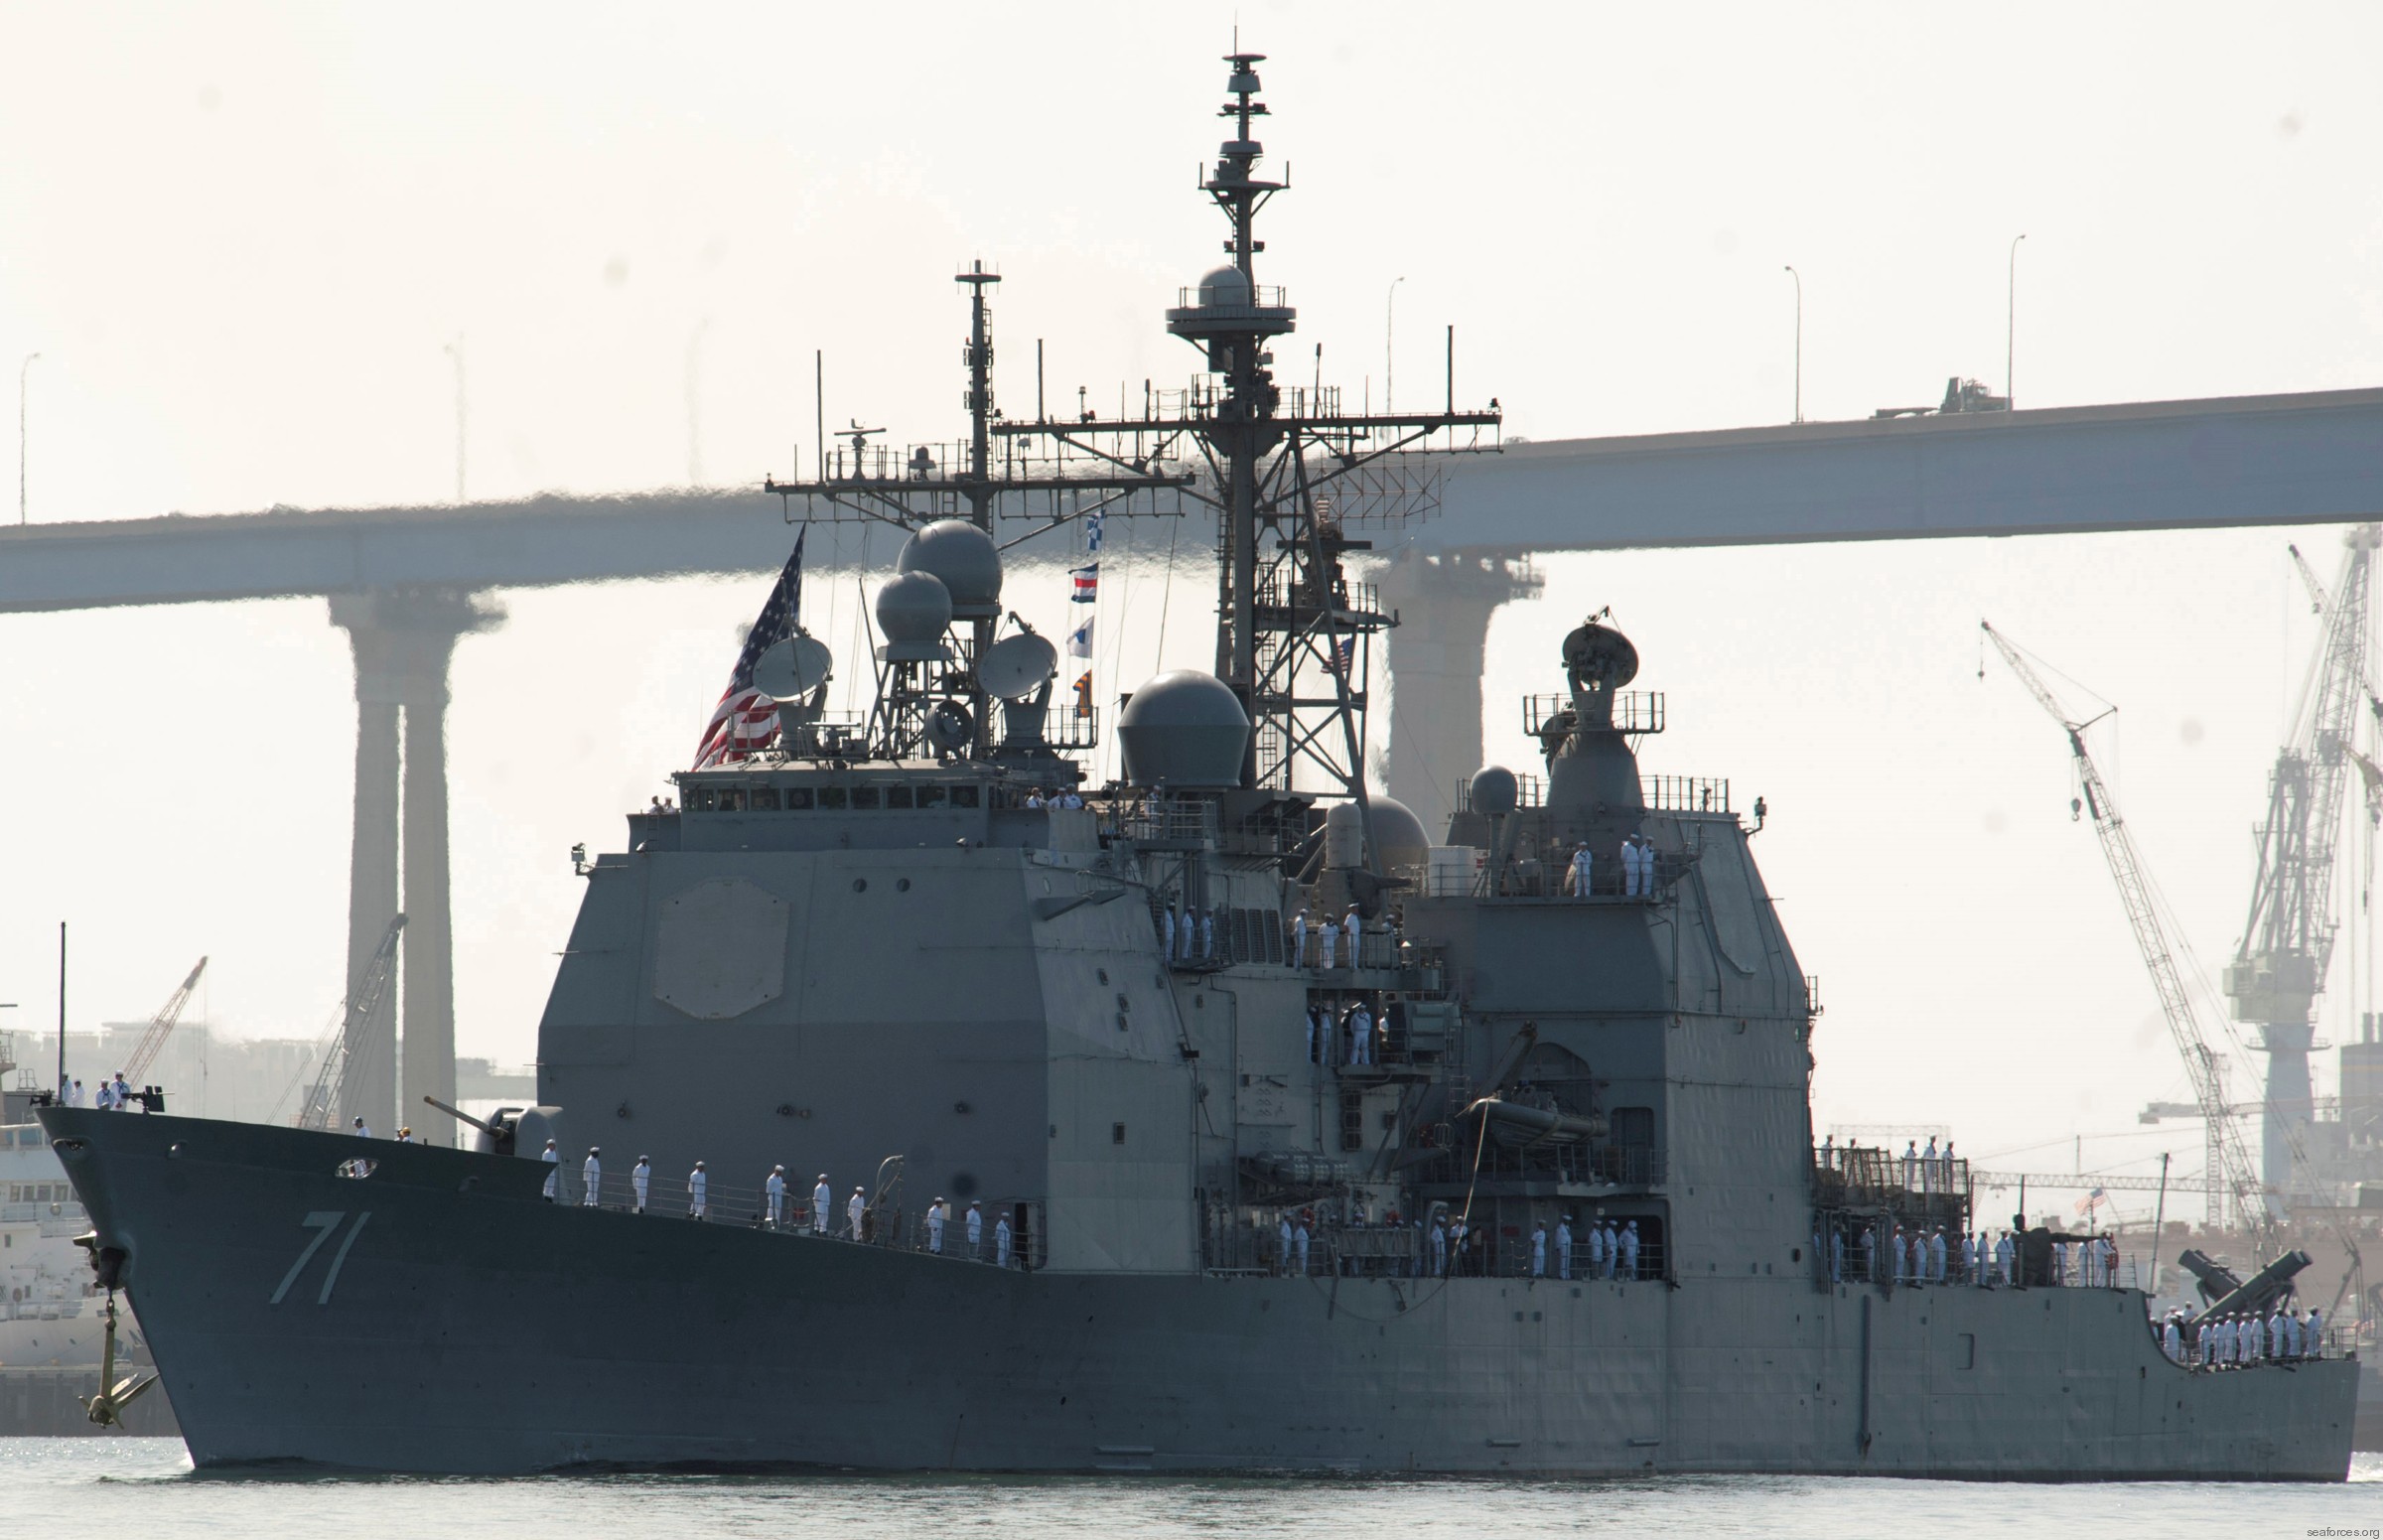 cg-71 uss cape st. george ticonderoga class guided missile cruiser us navy 17